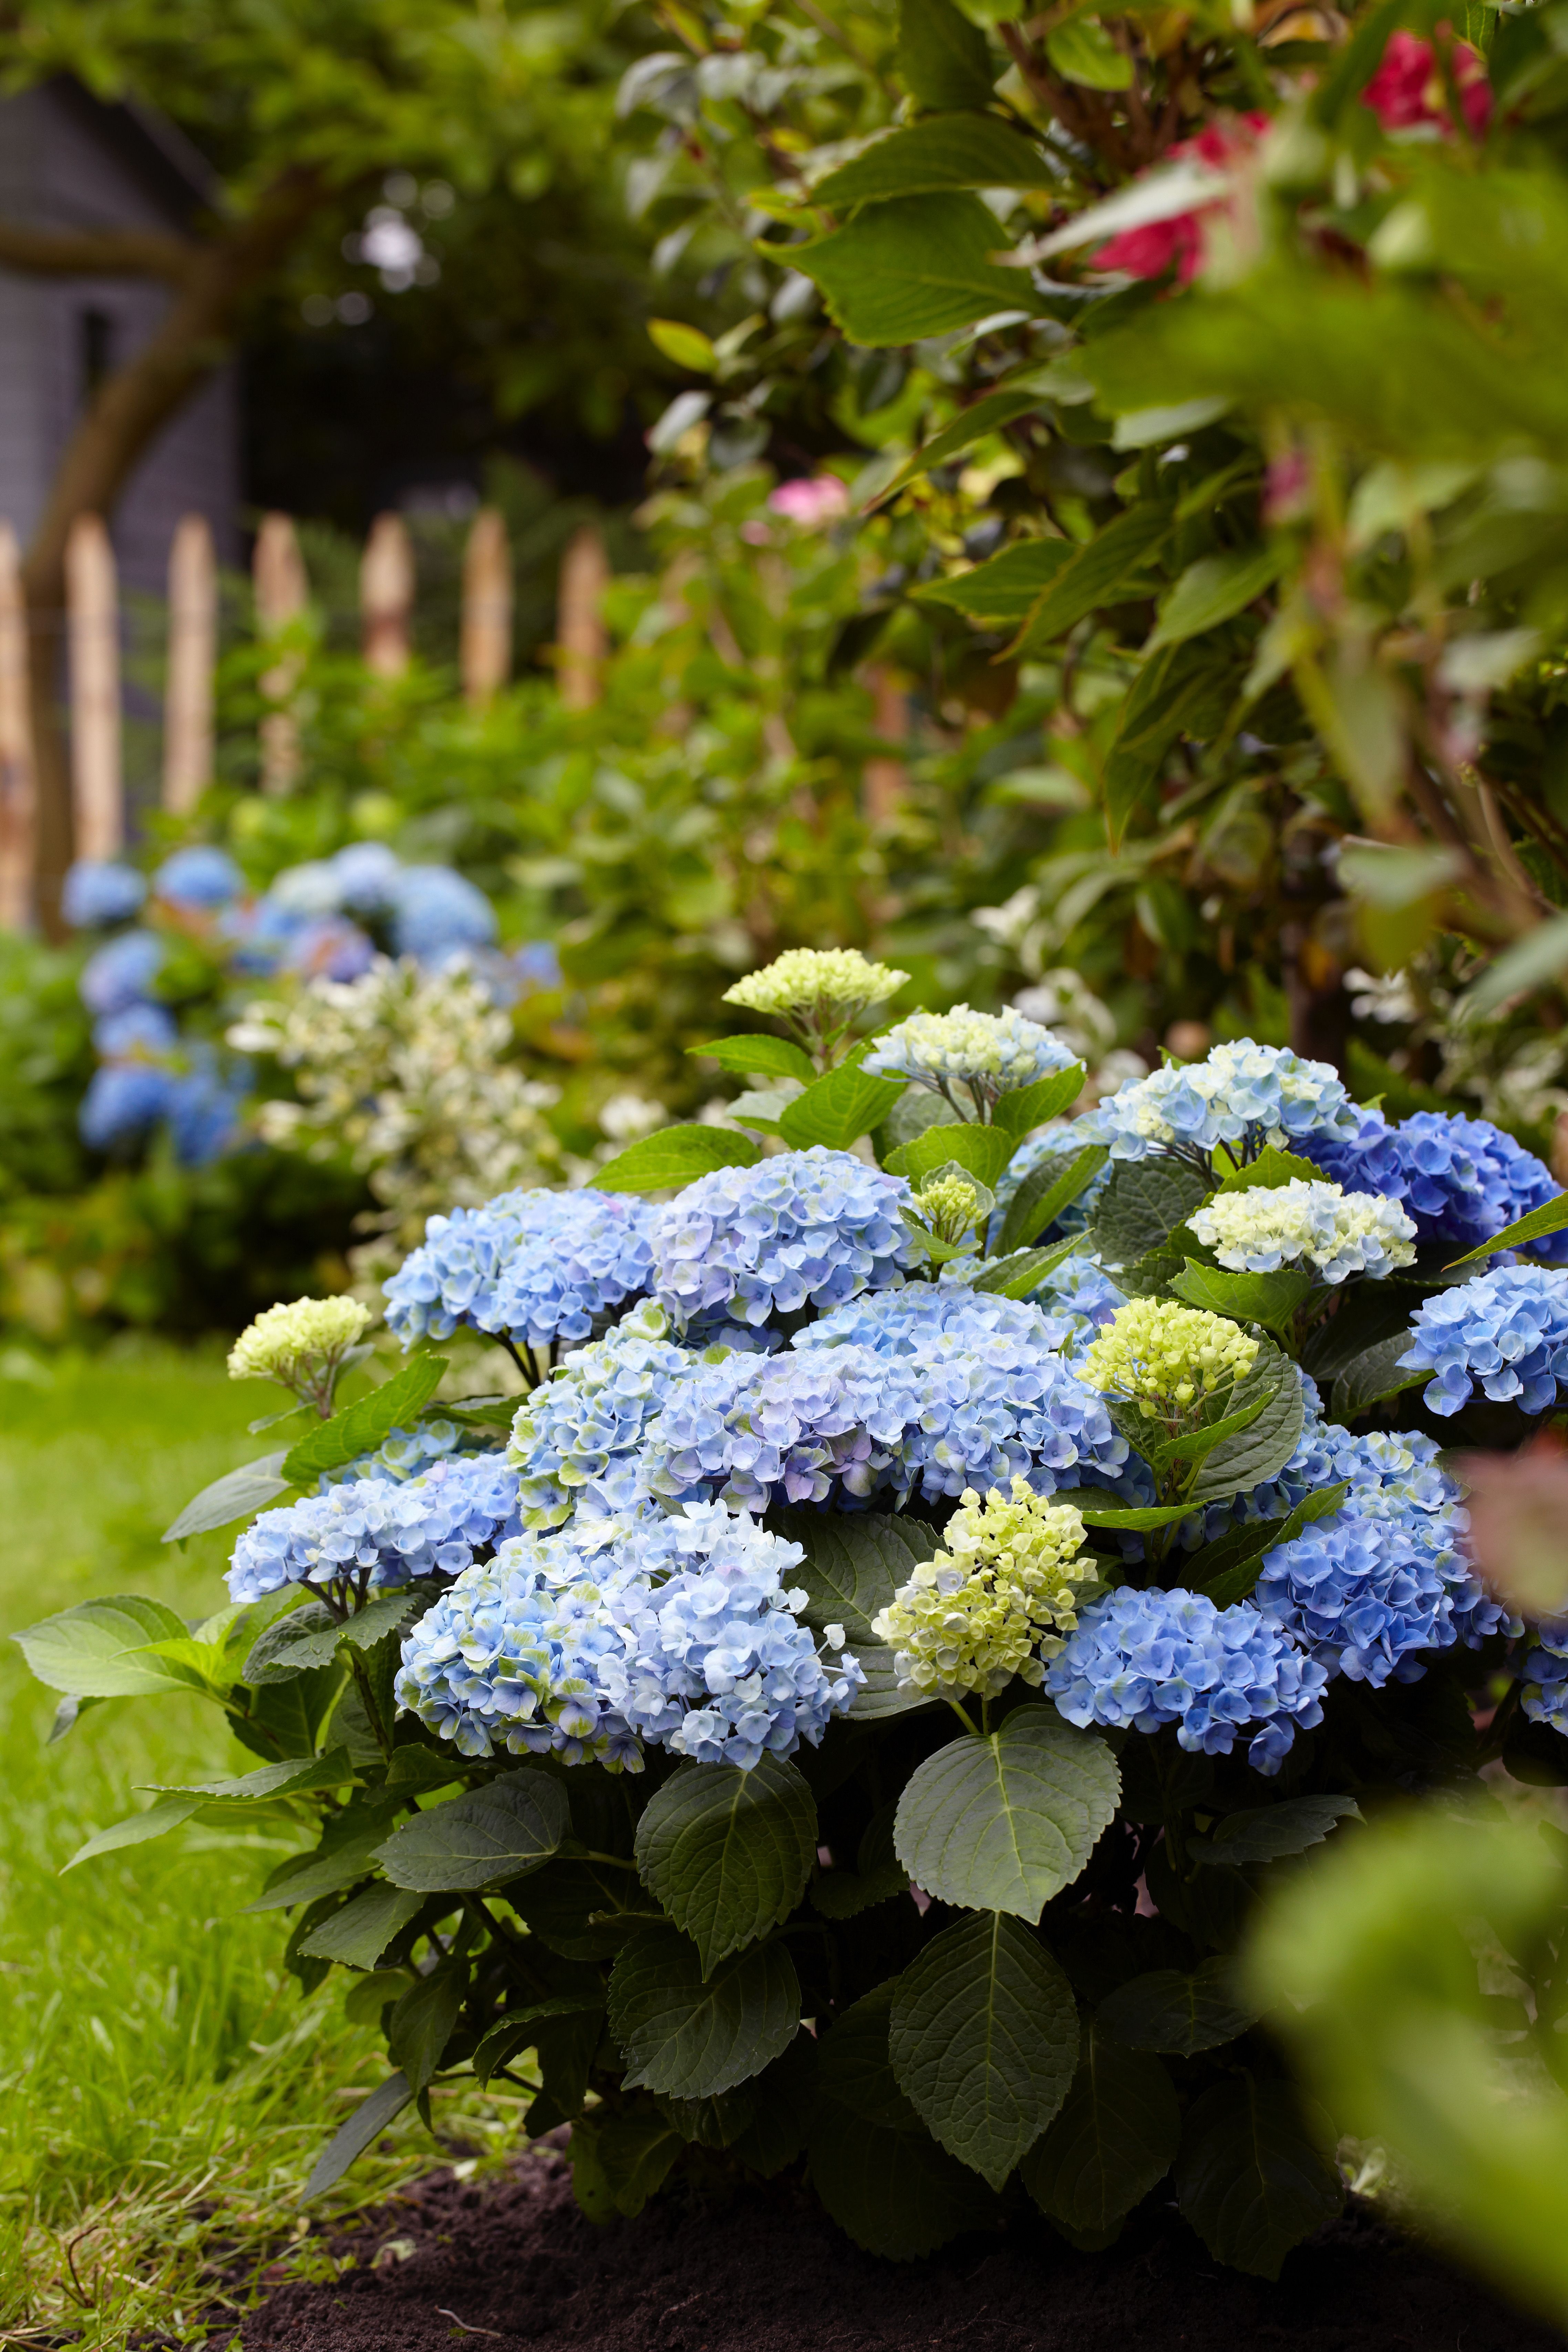 images/plants/hydrangea/hyd-magical-everlasting-revolution/hyd-magical-everlasting-revolution-0128.jpg